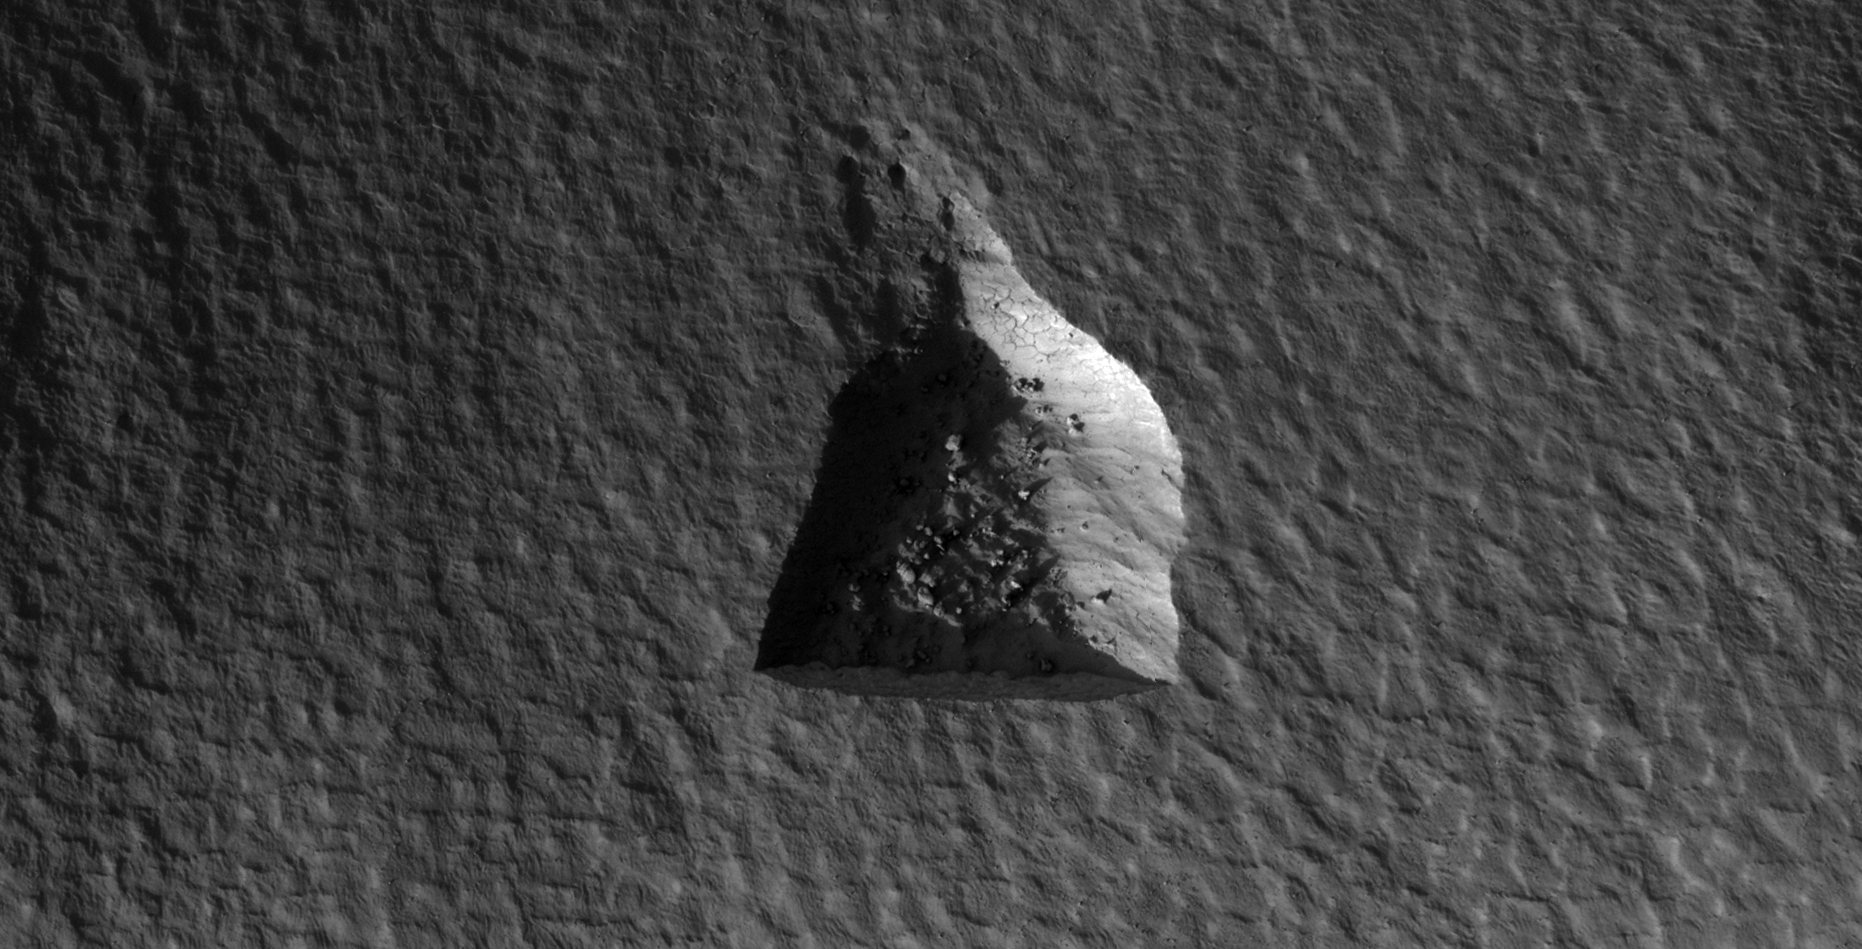 Mine or triangular-shaped hole carved into the Martian surface. The two straight sides measure approximately 210 metres in length